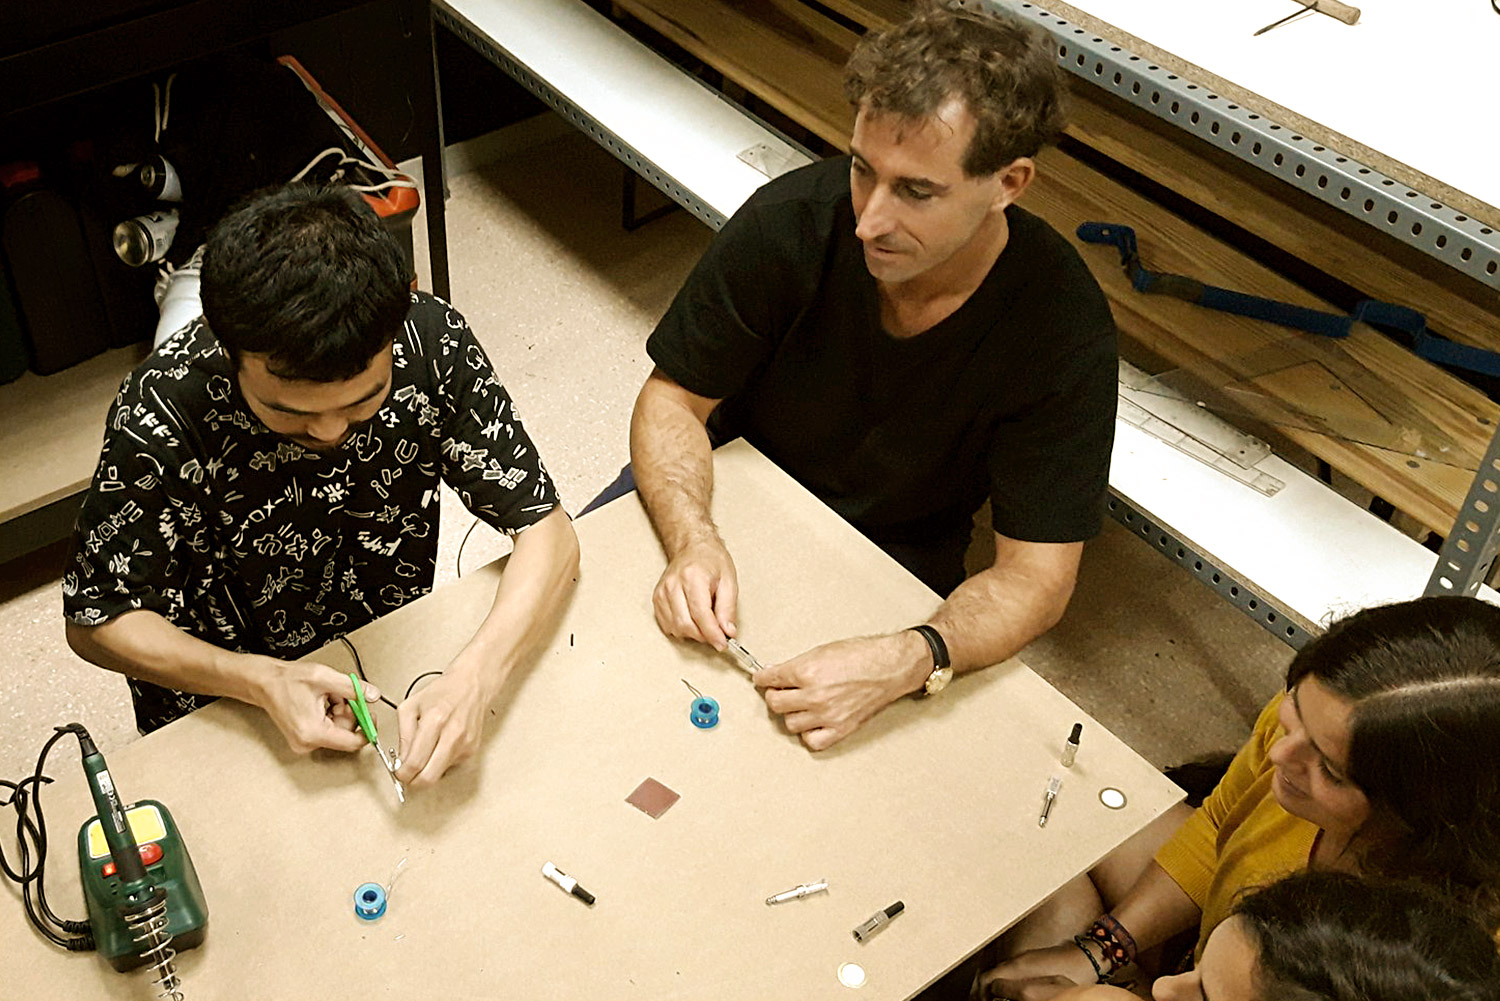 Artists Lolo & Sosaku during a MESH workshop about art and creative technologies.